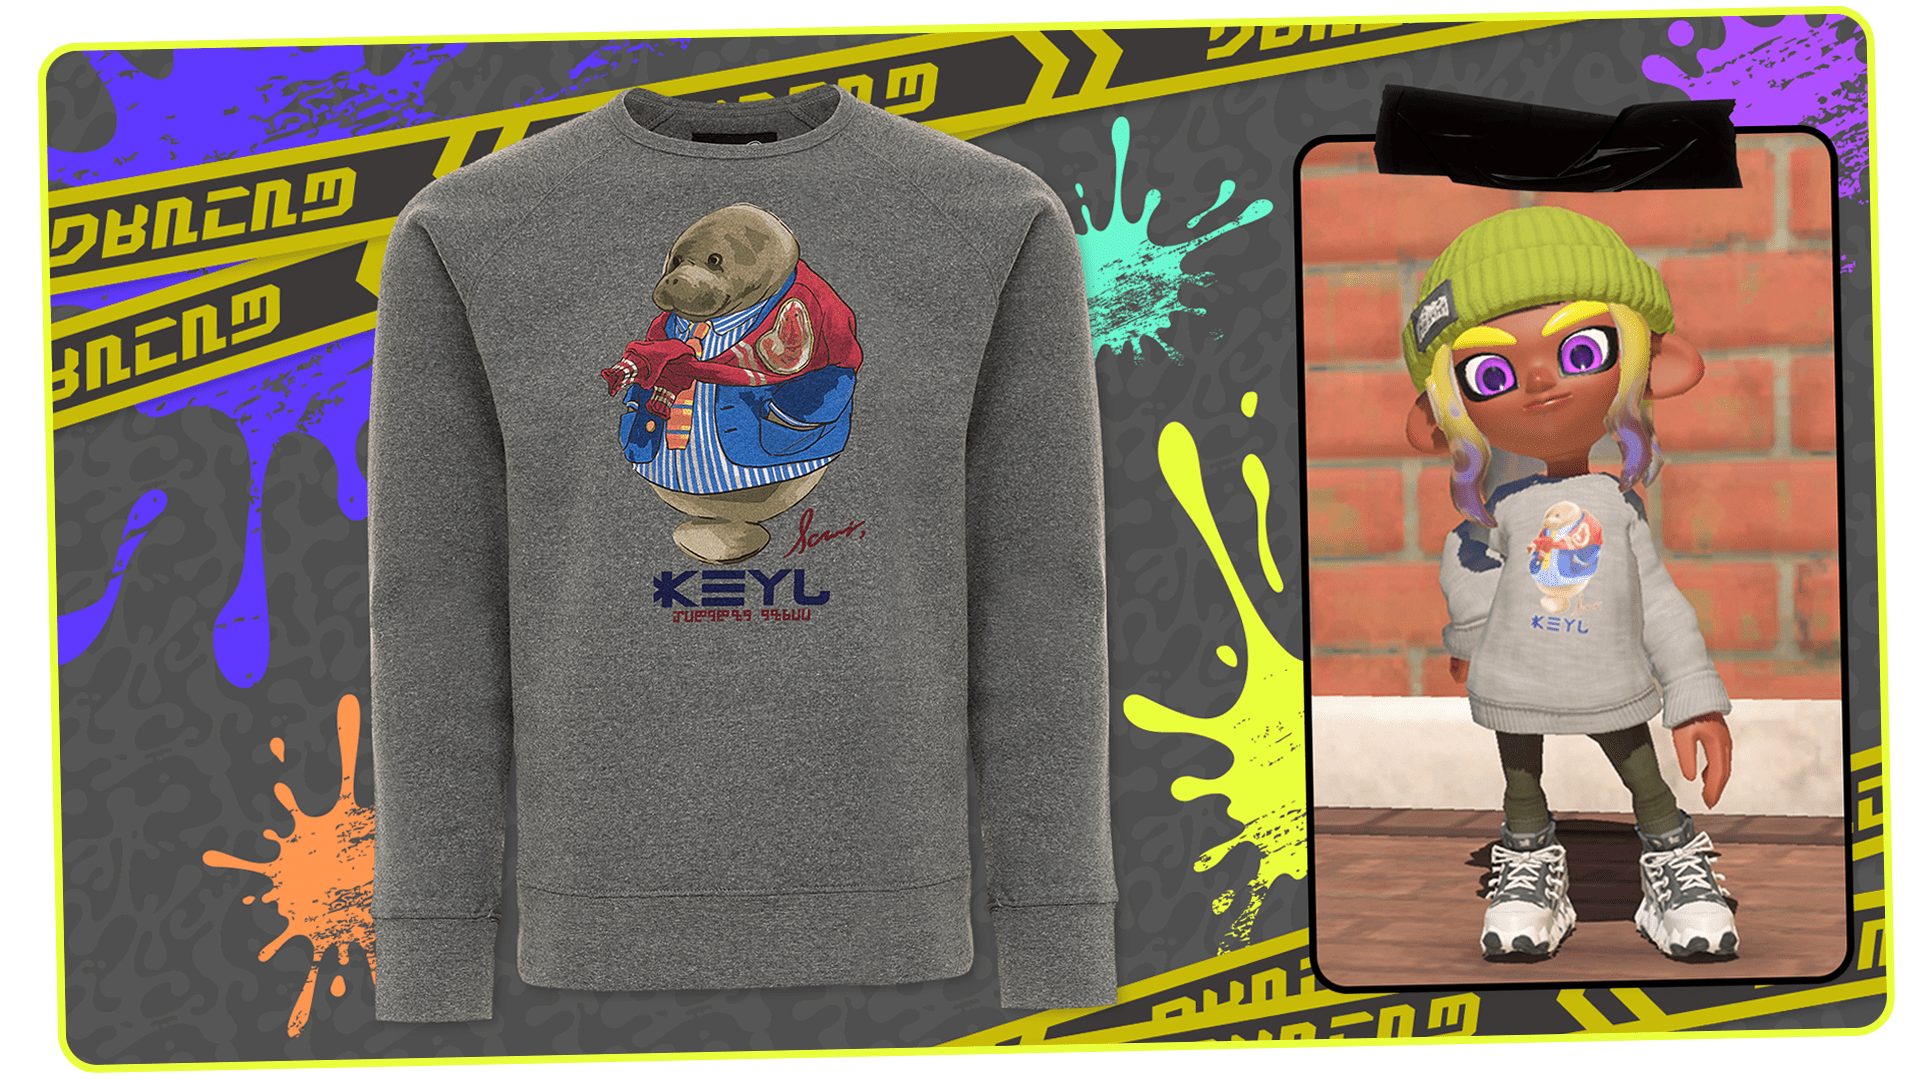 Manatee Swag Sweatshirt and in-game avatar wearing it